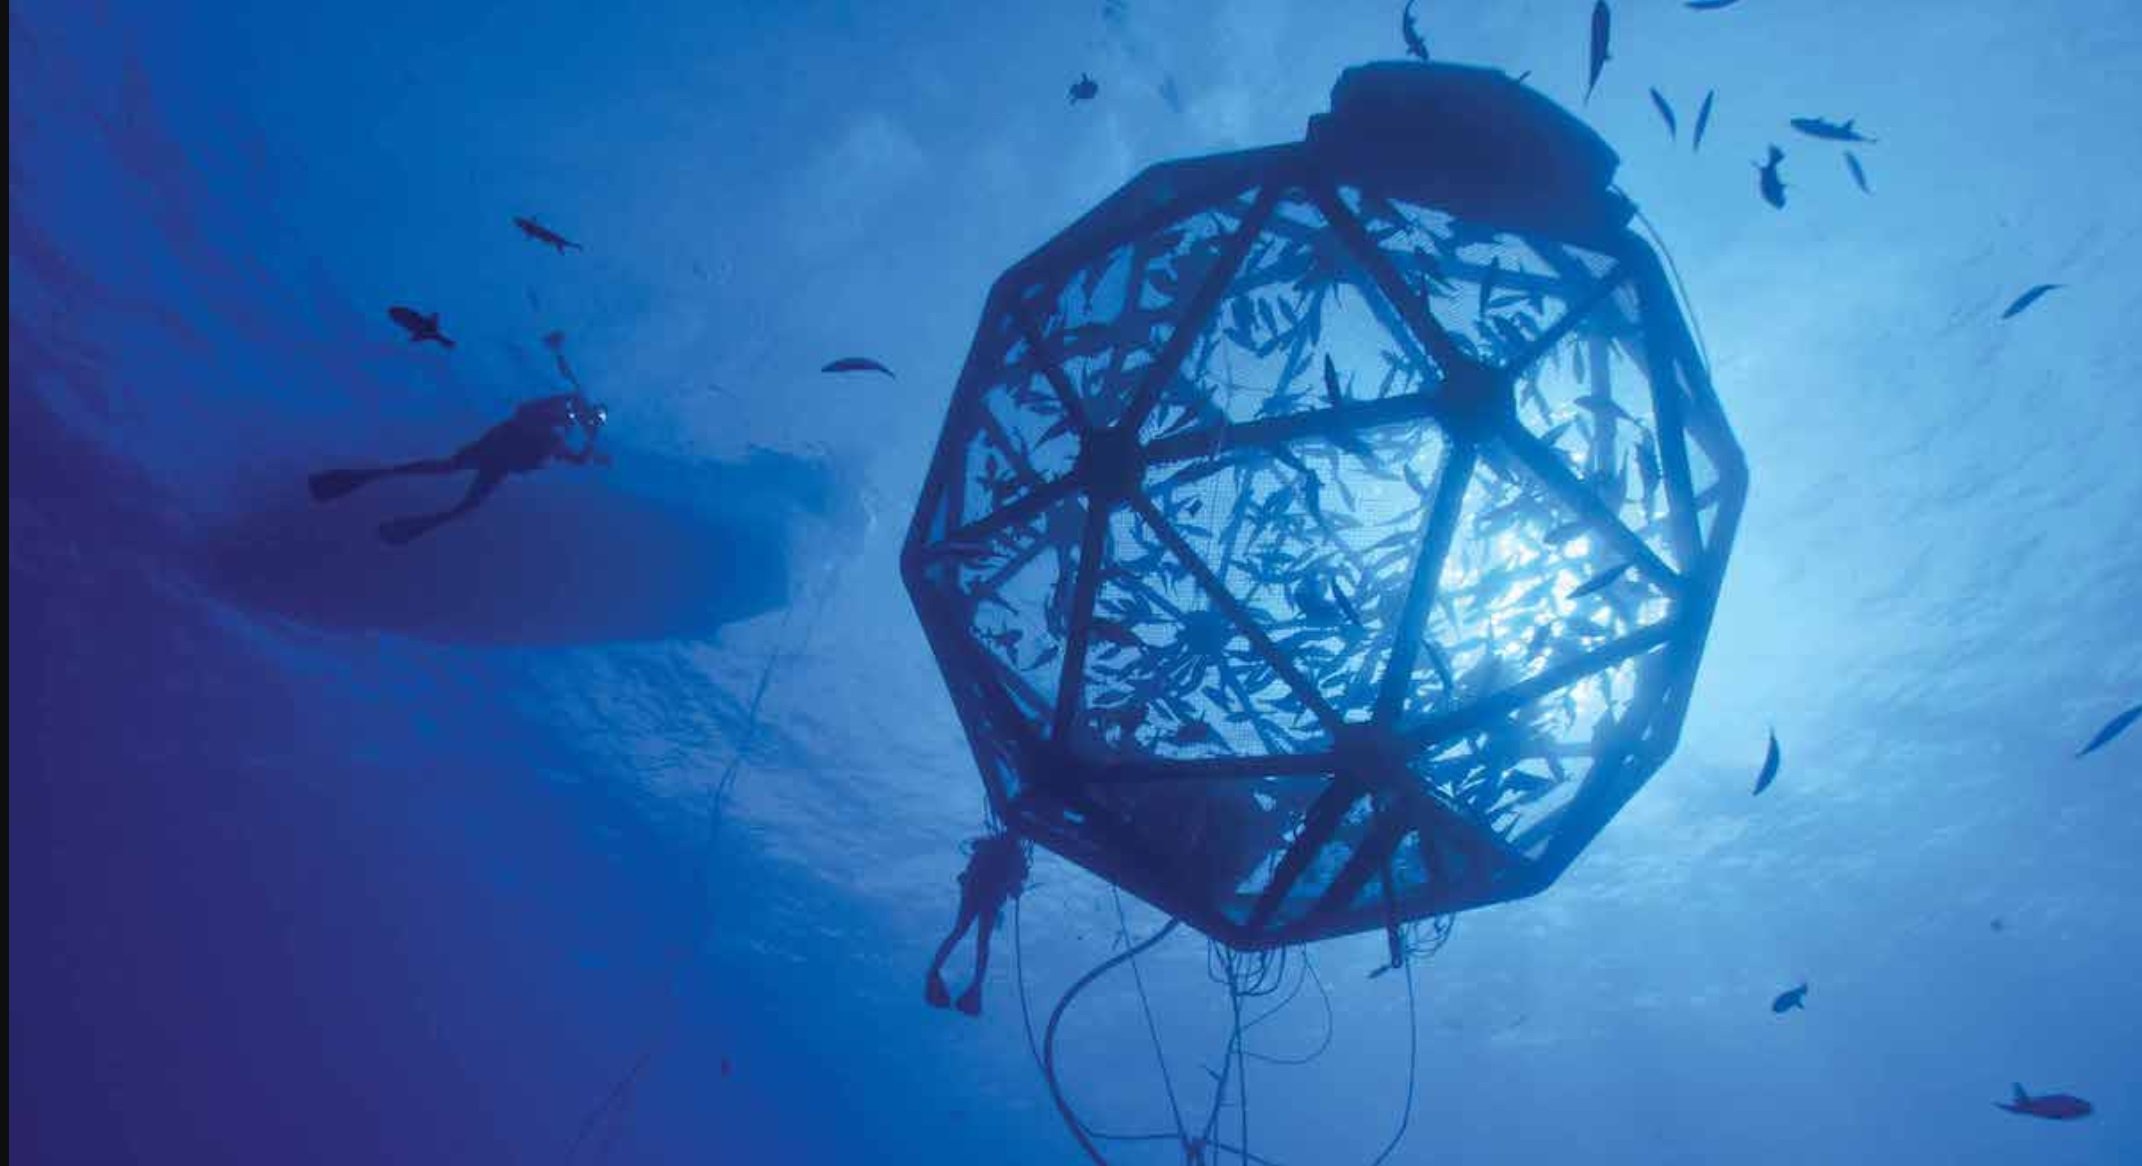 Aquaculture Market 2019 - Industry Outlook and Growth by 2024